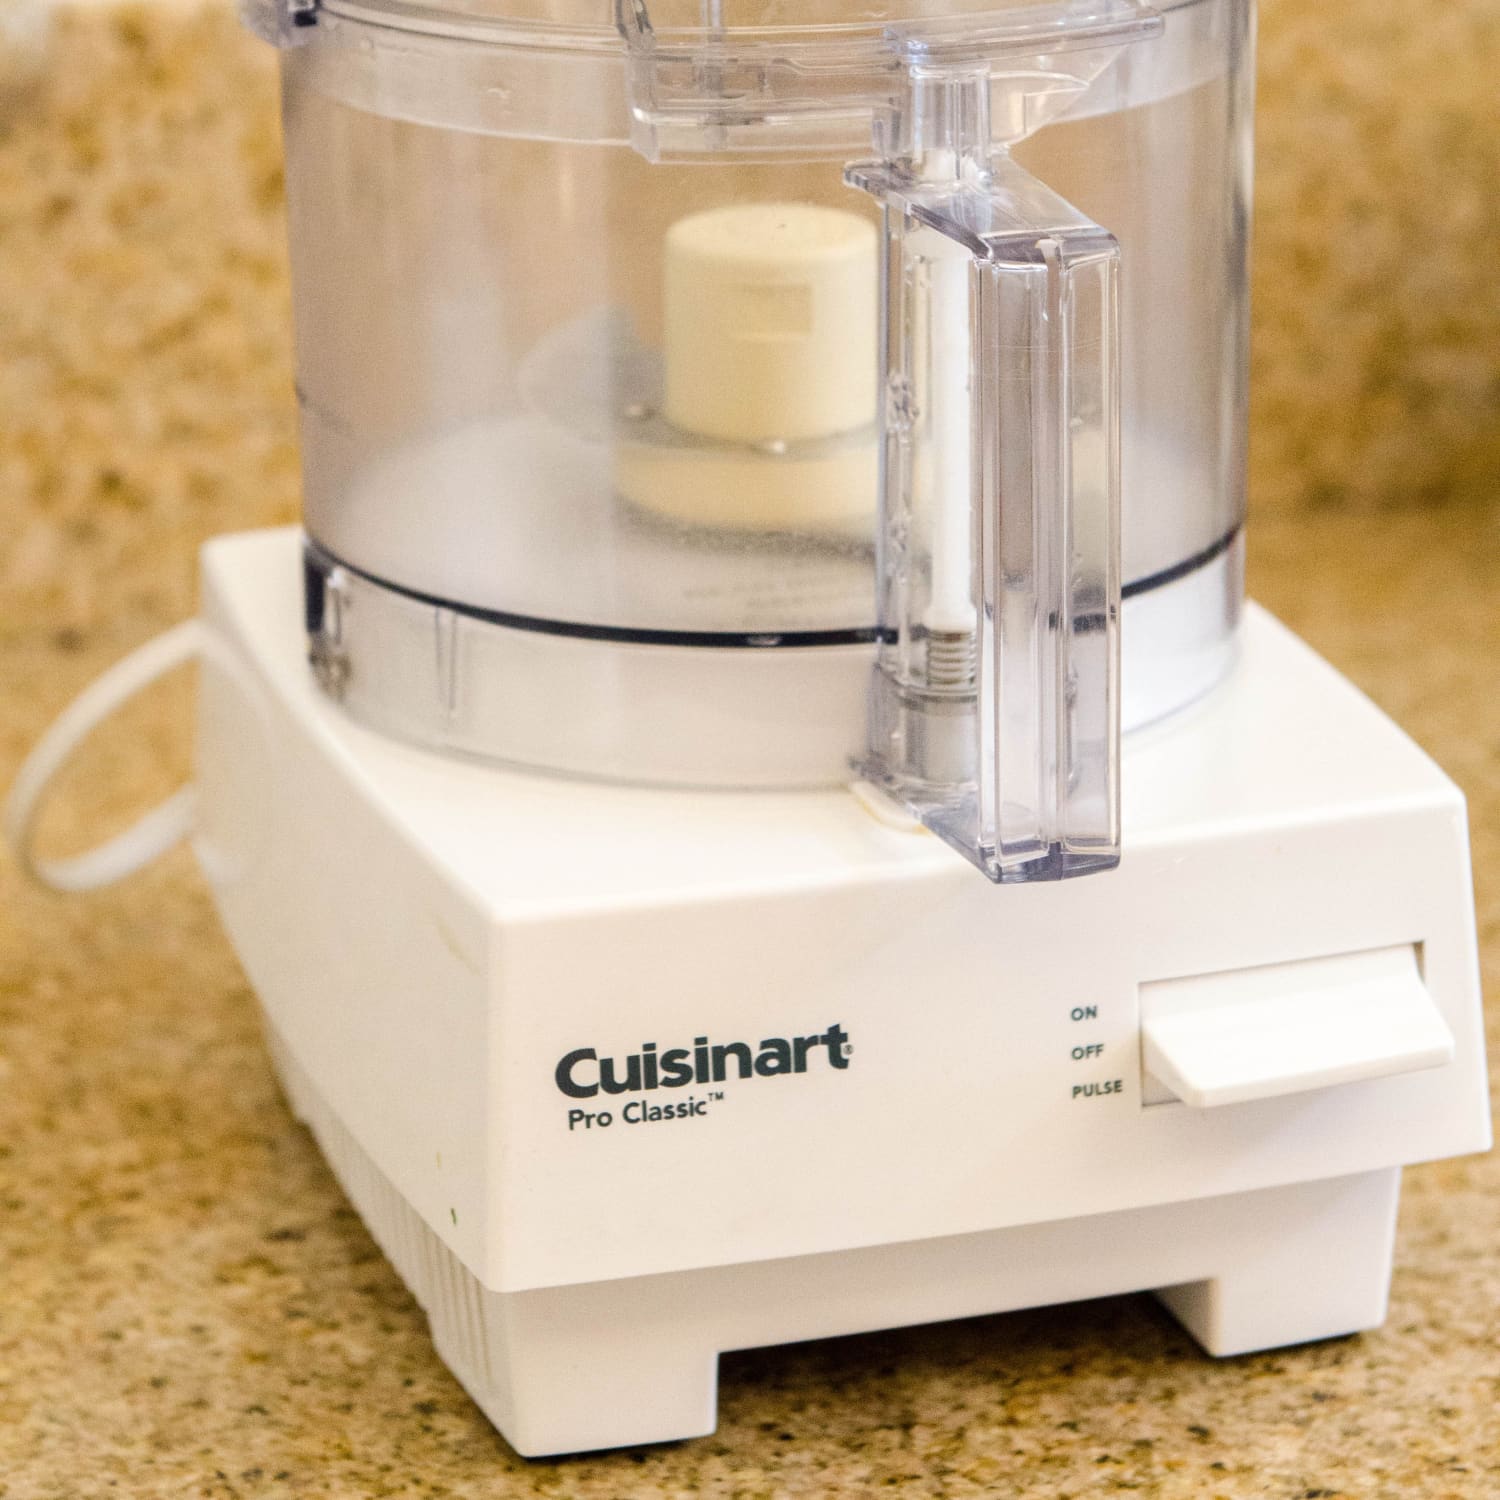 How to Clean a Food Processor in 4 Steps